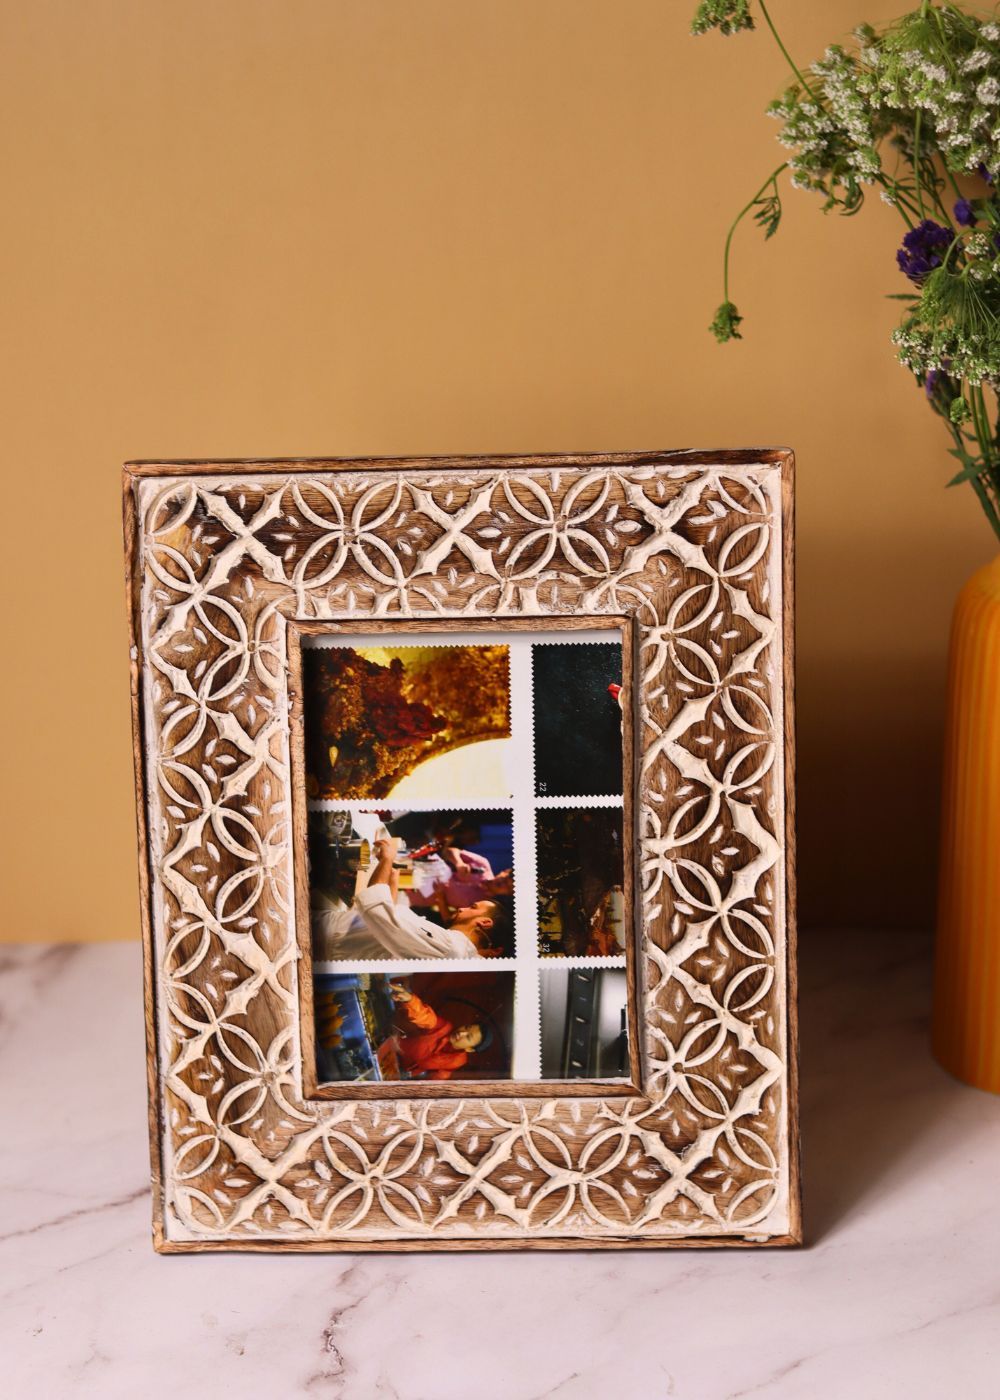 this frame handmade in india